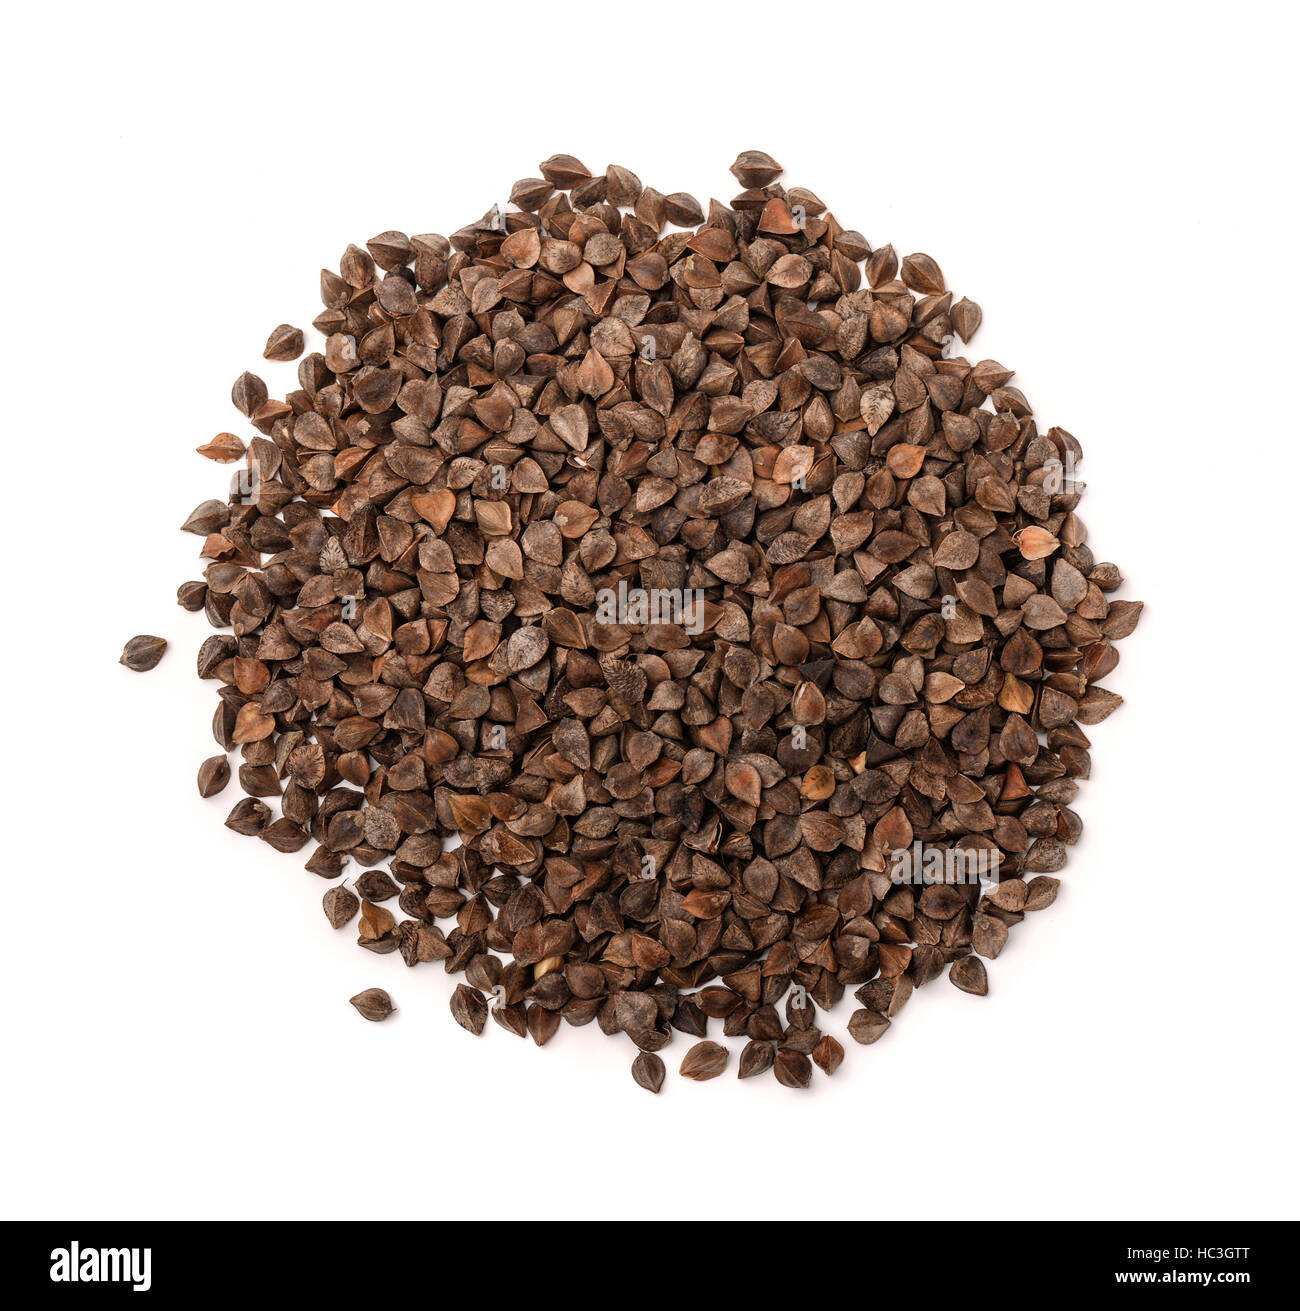 Top view of unhulled buckwheat pile isolated on white Stock Photo